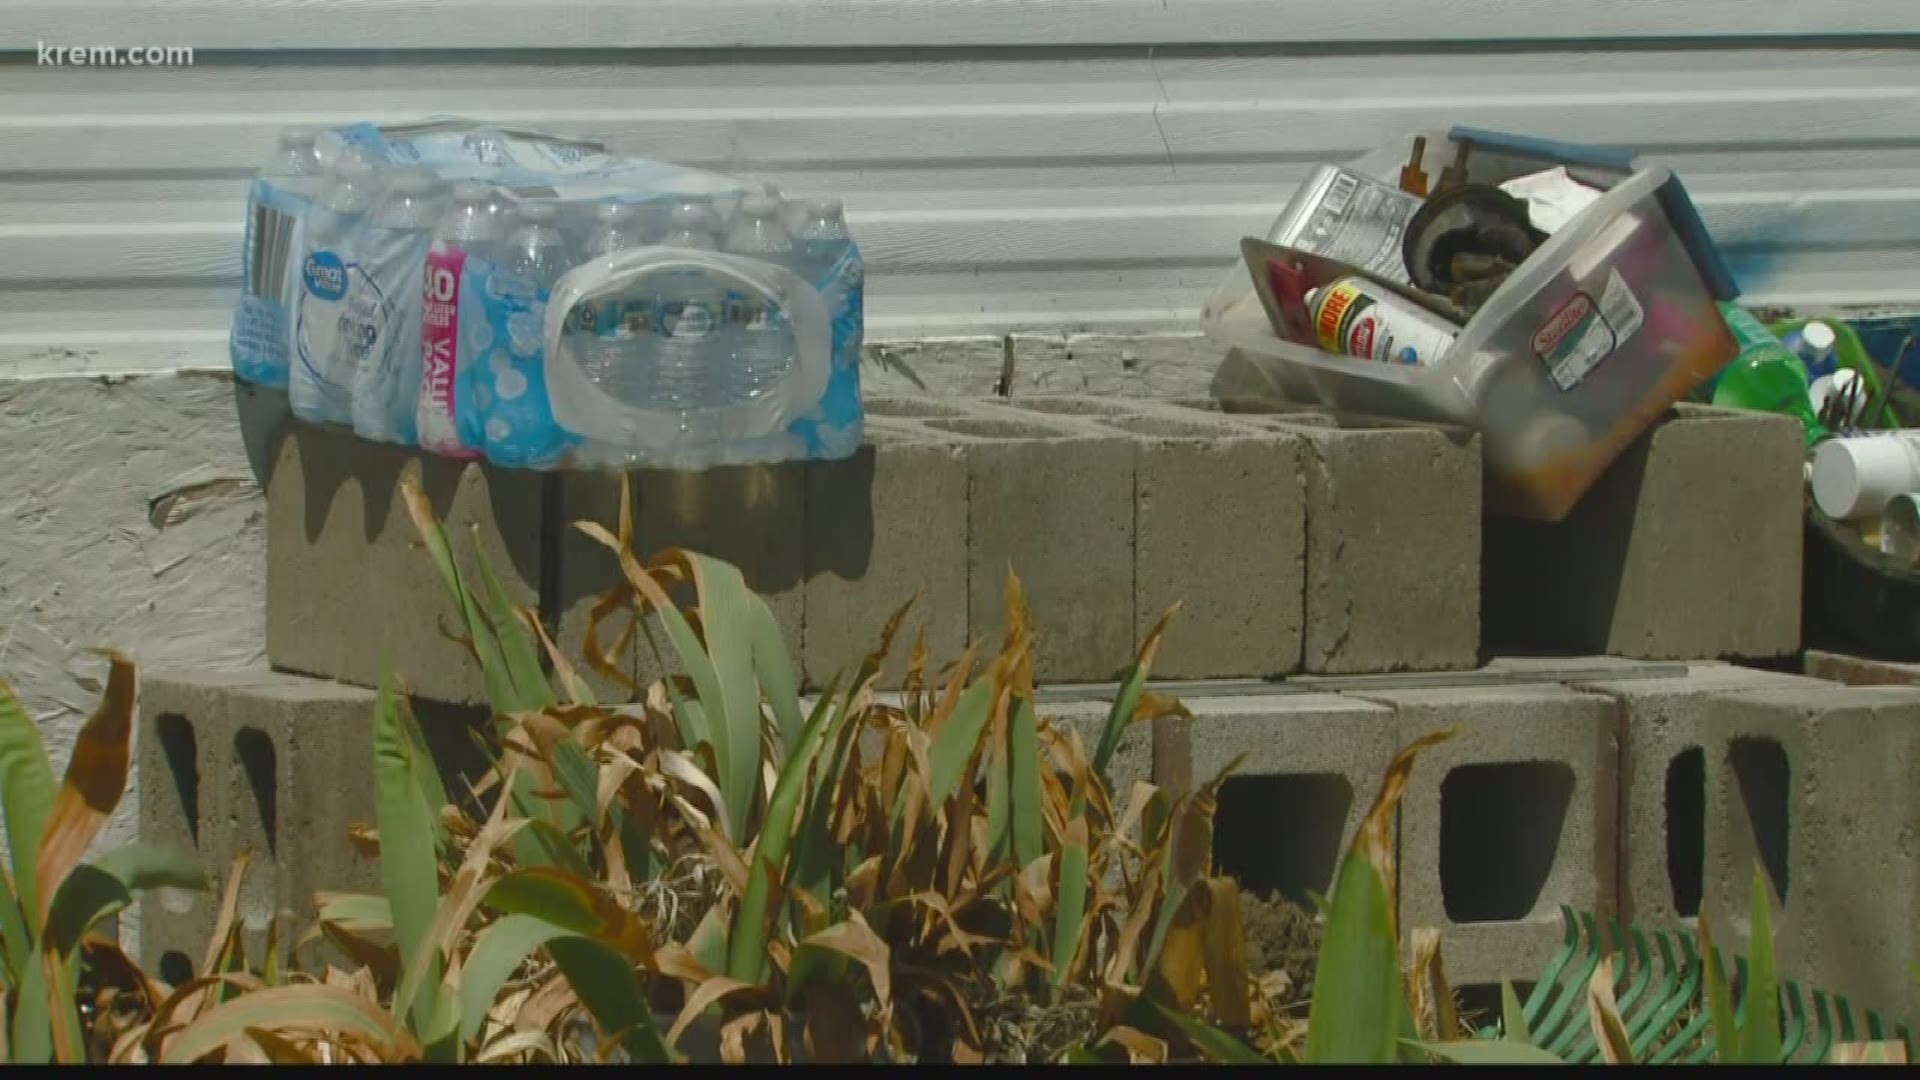 People living in a mobile home park in Spokane Valley are under a health notice right now. This was due to E. coli found in the park's well system earlier this month.